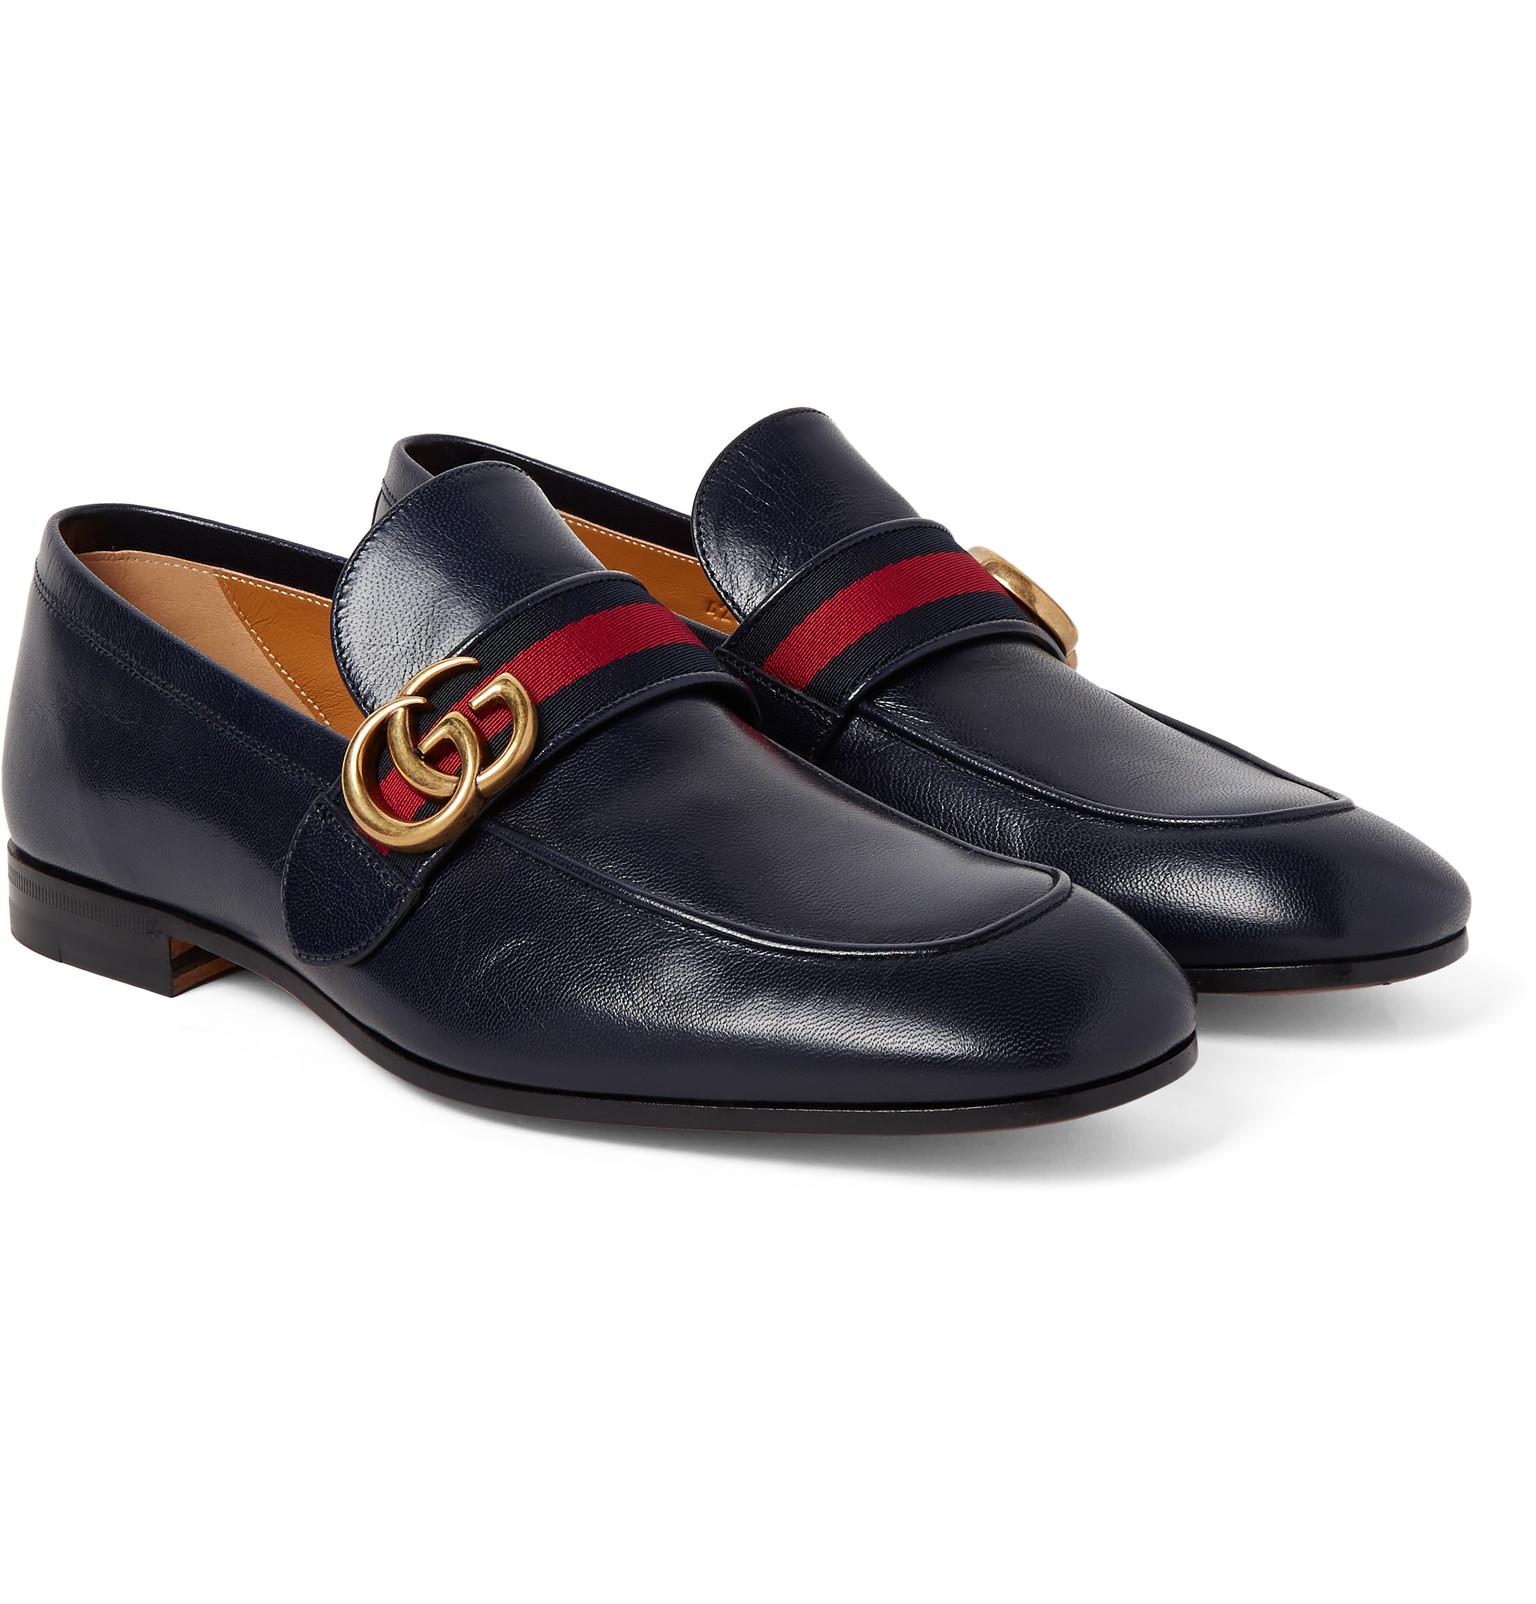 Gucci Leather Loafers in Blue for Men - Lyst